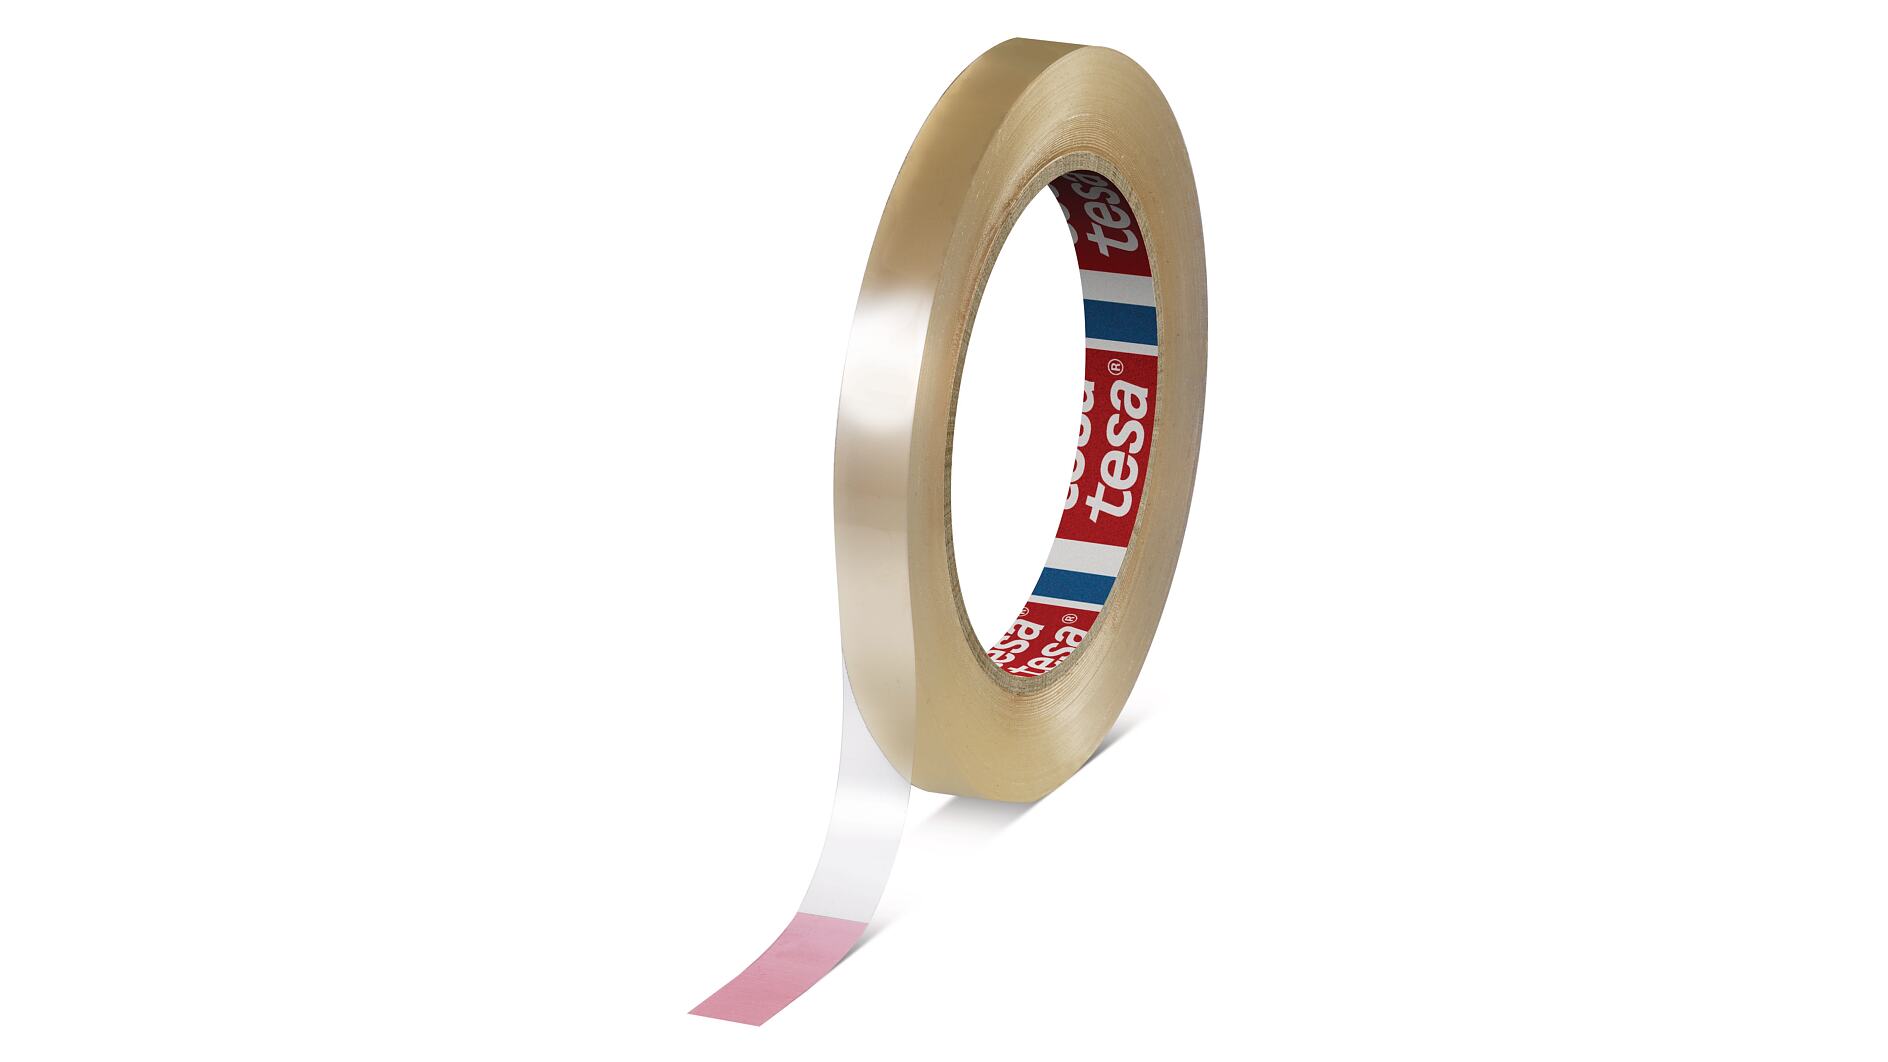 Transparent acrylic adhesive Double Sided PET tape for FPC China  Manufacturer